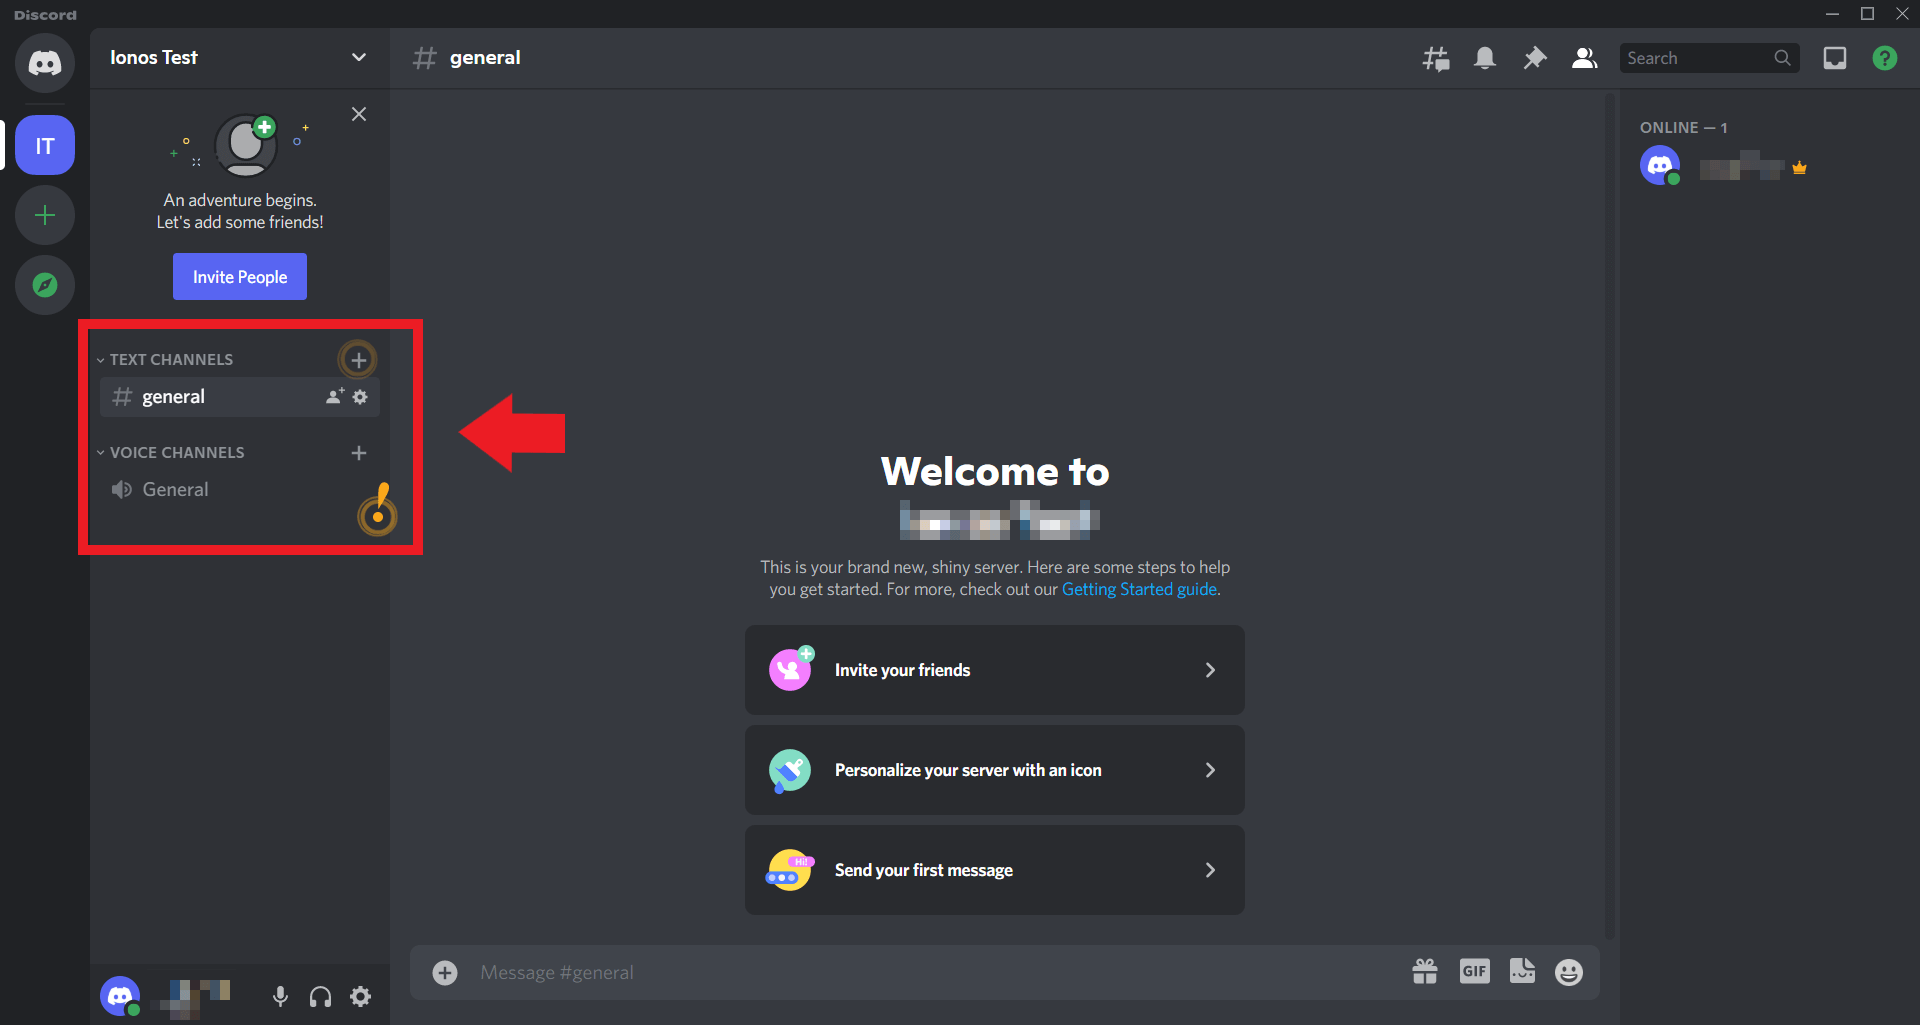 How to set up a Discord A step-by-step guide - IONOS